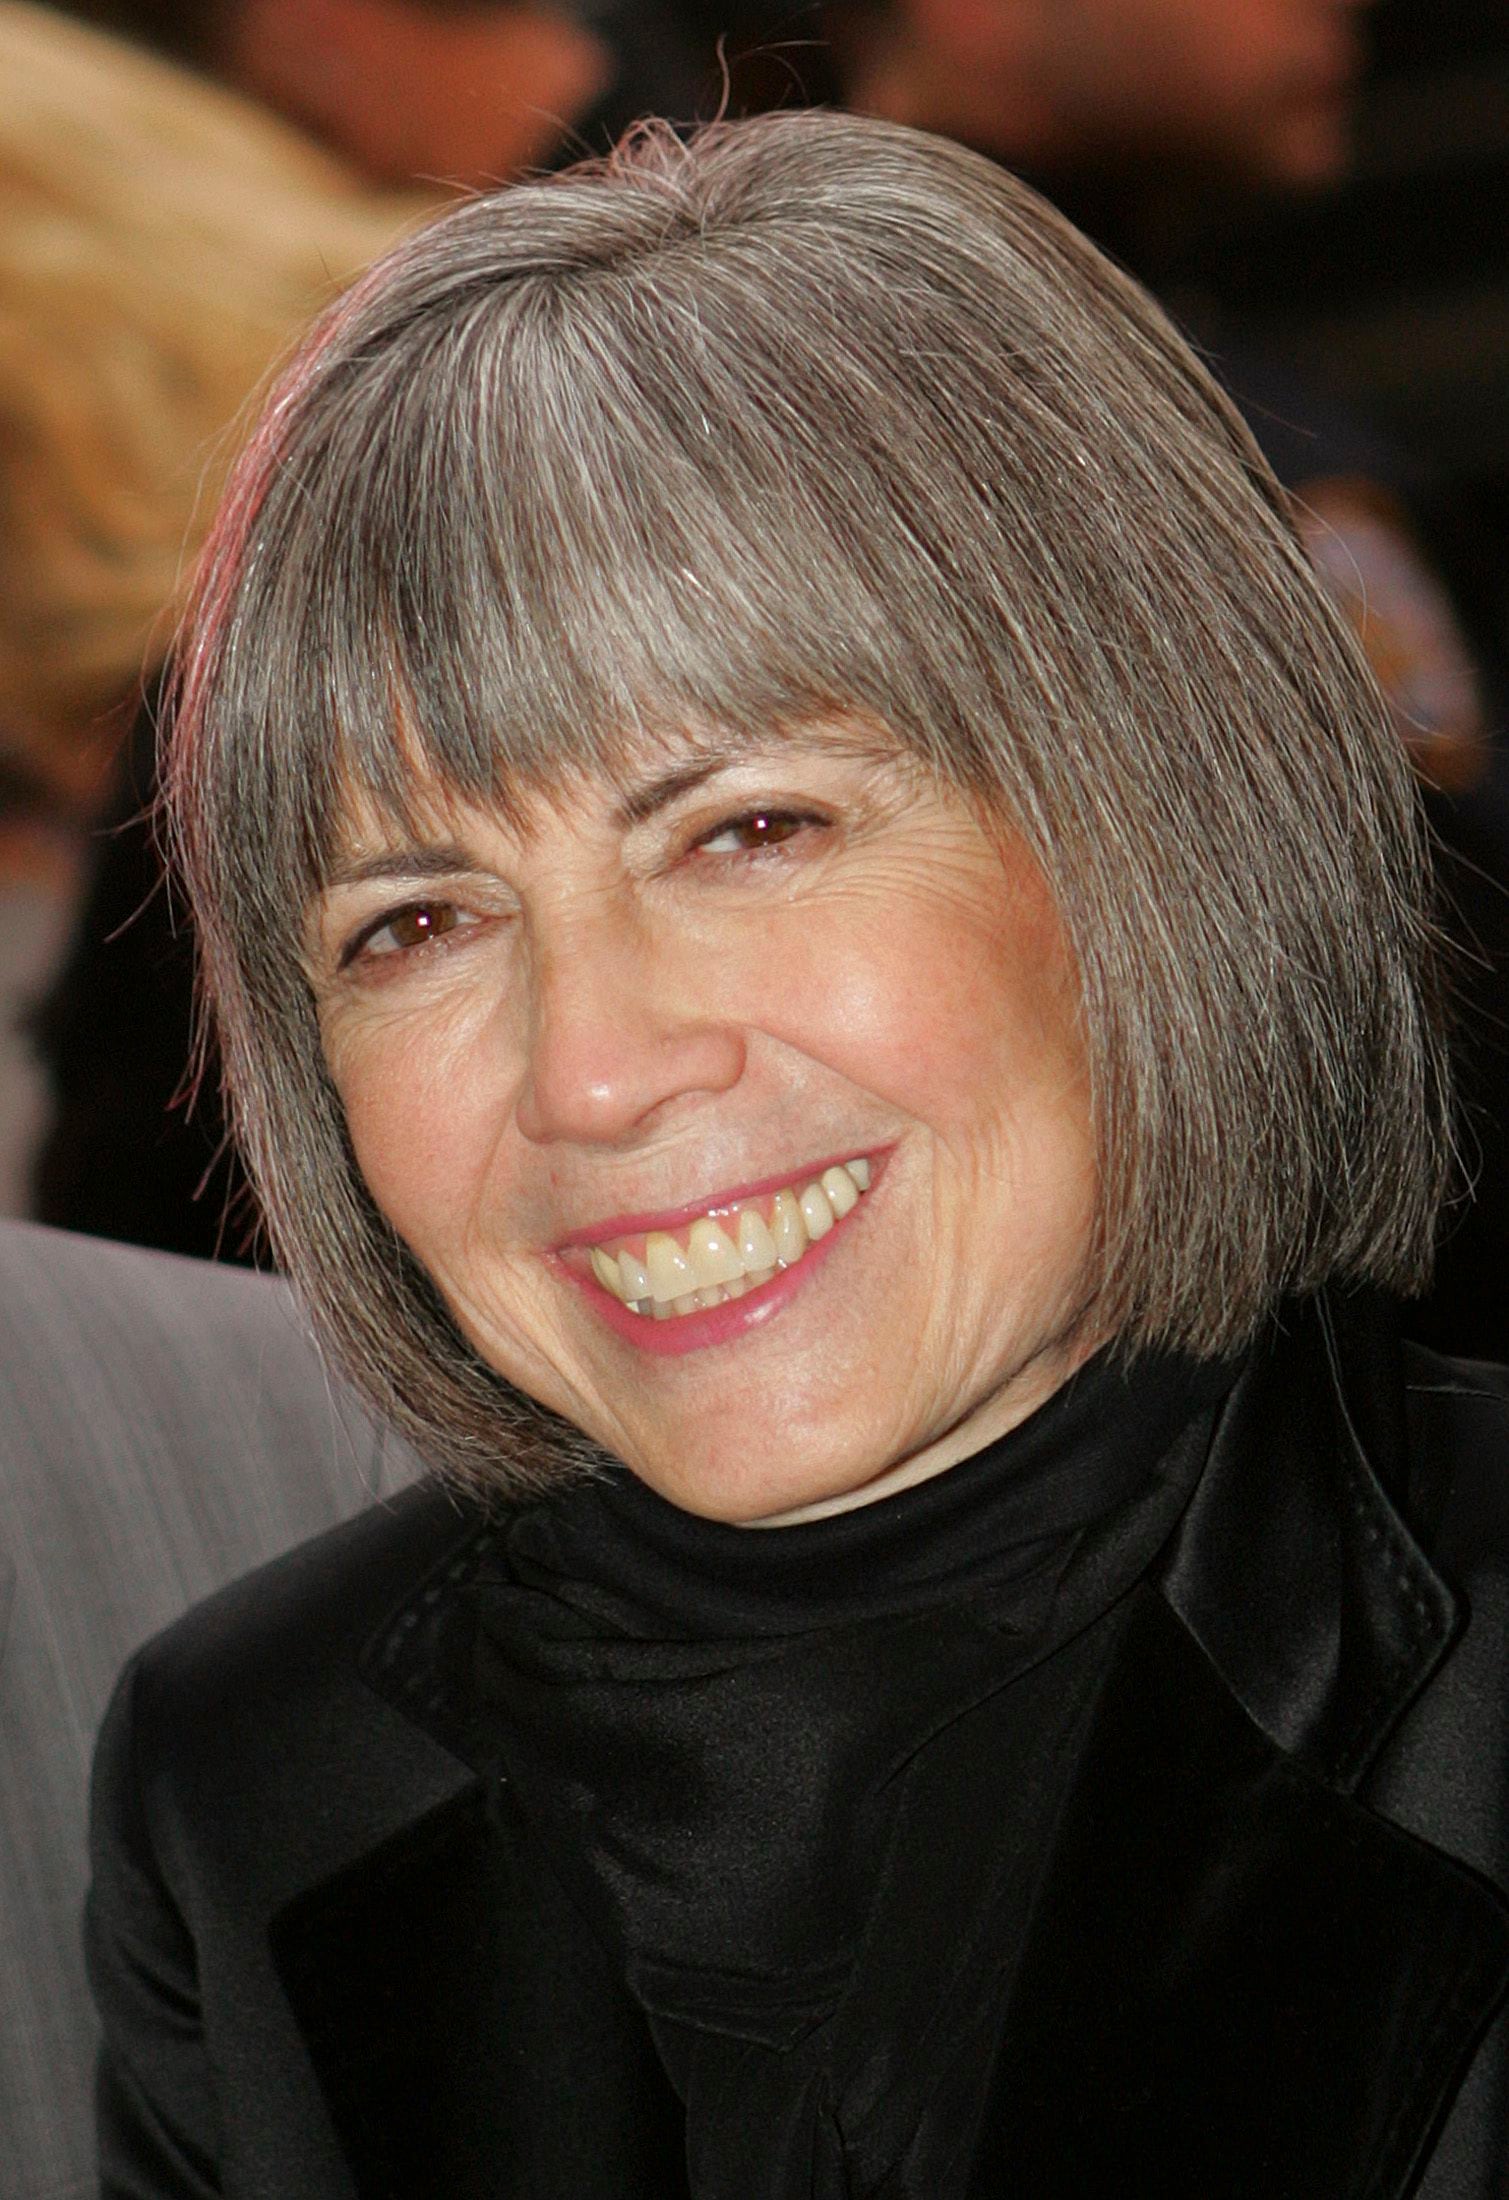 Anne Rice, author of gothic novels, dead at 80